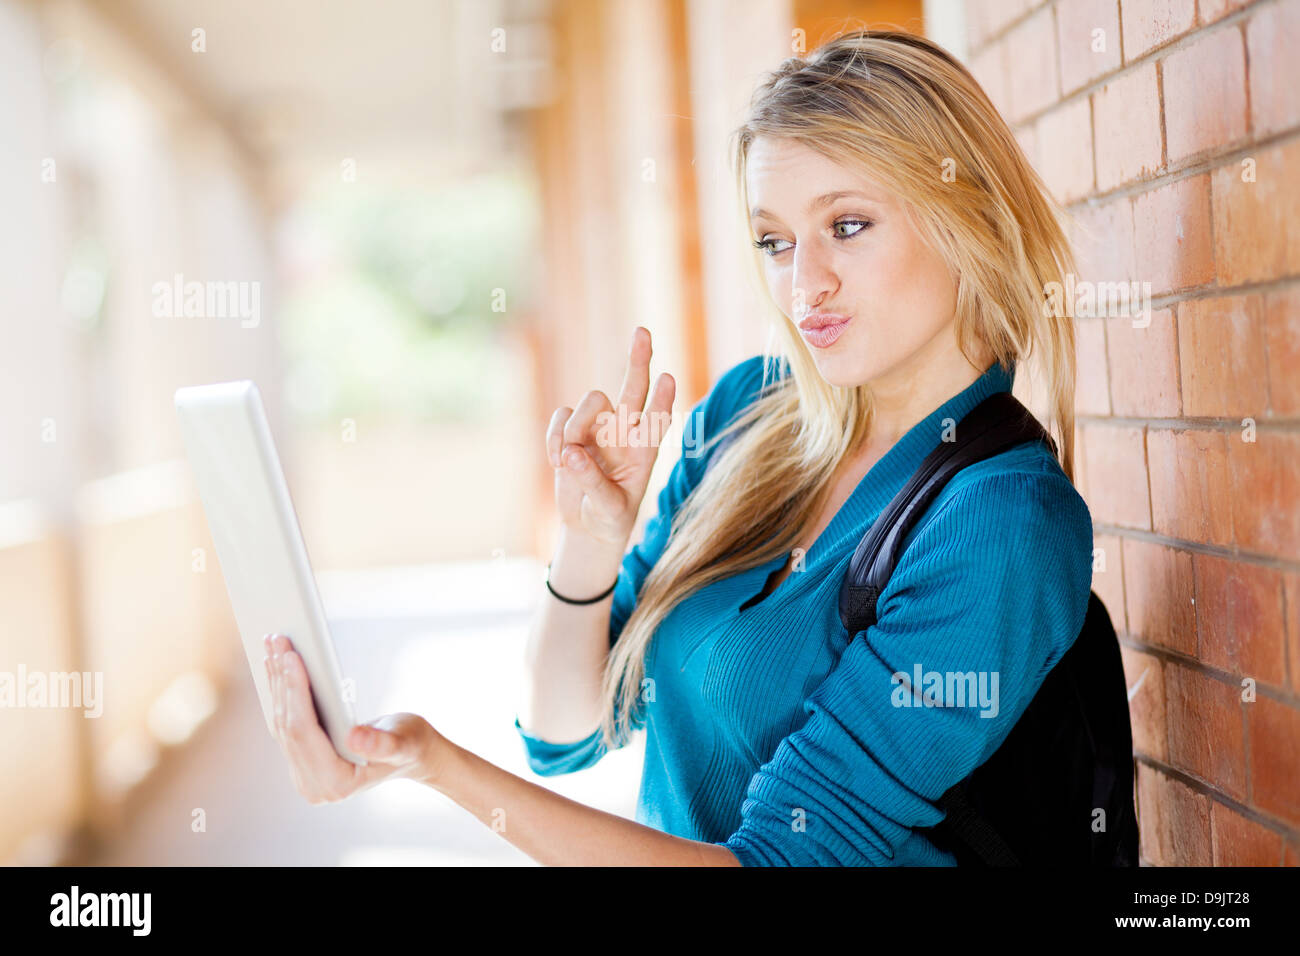 cute female college student using tablet computer communicate with friends Stock Photo